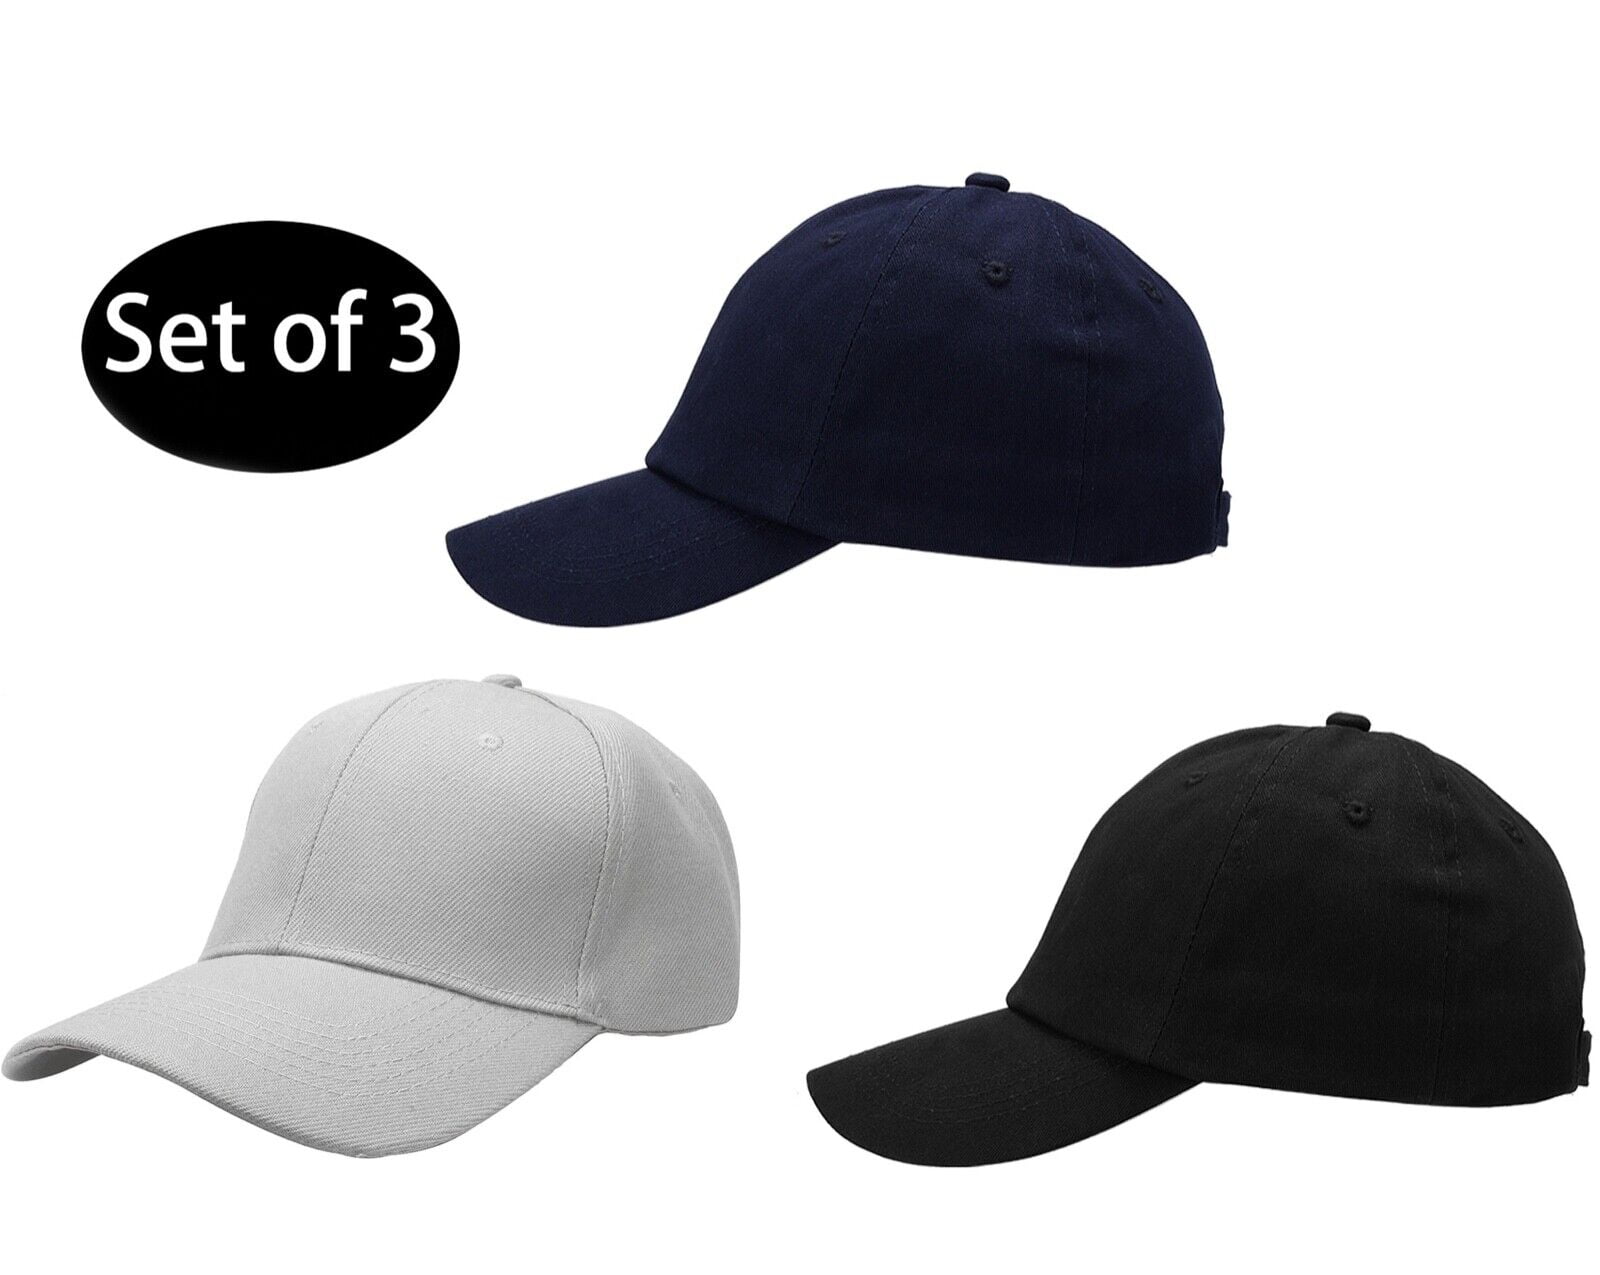 Profile Sports Hats, & Mens Blue Baseball Seasons Black Outdoor Gray Set Solid Women for Classical Cotton Cap, All Cap Ball Hat Workouts Low Running of 3,